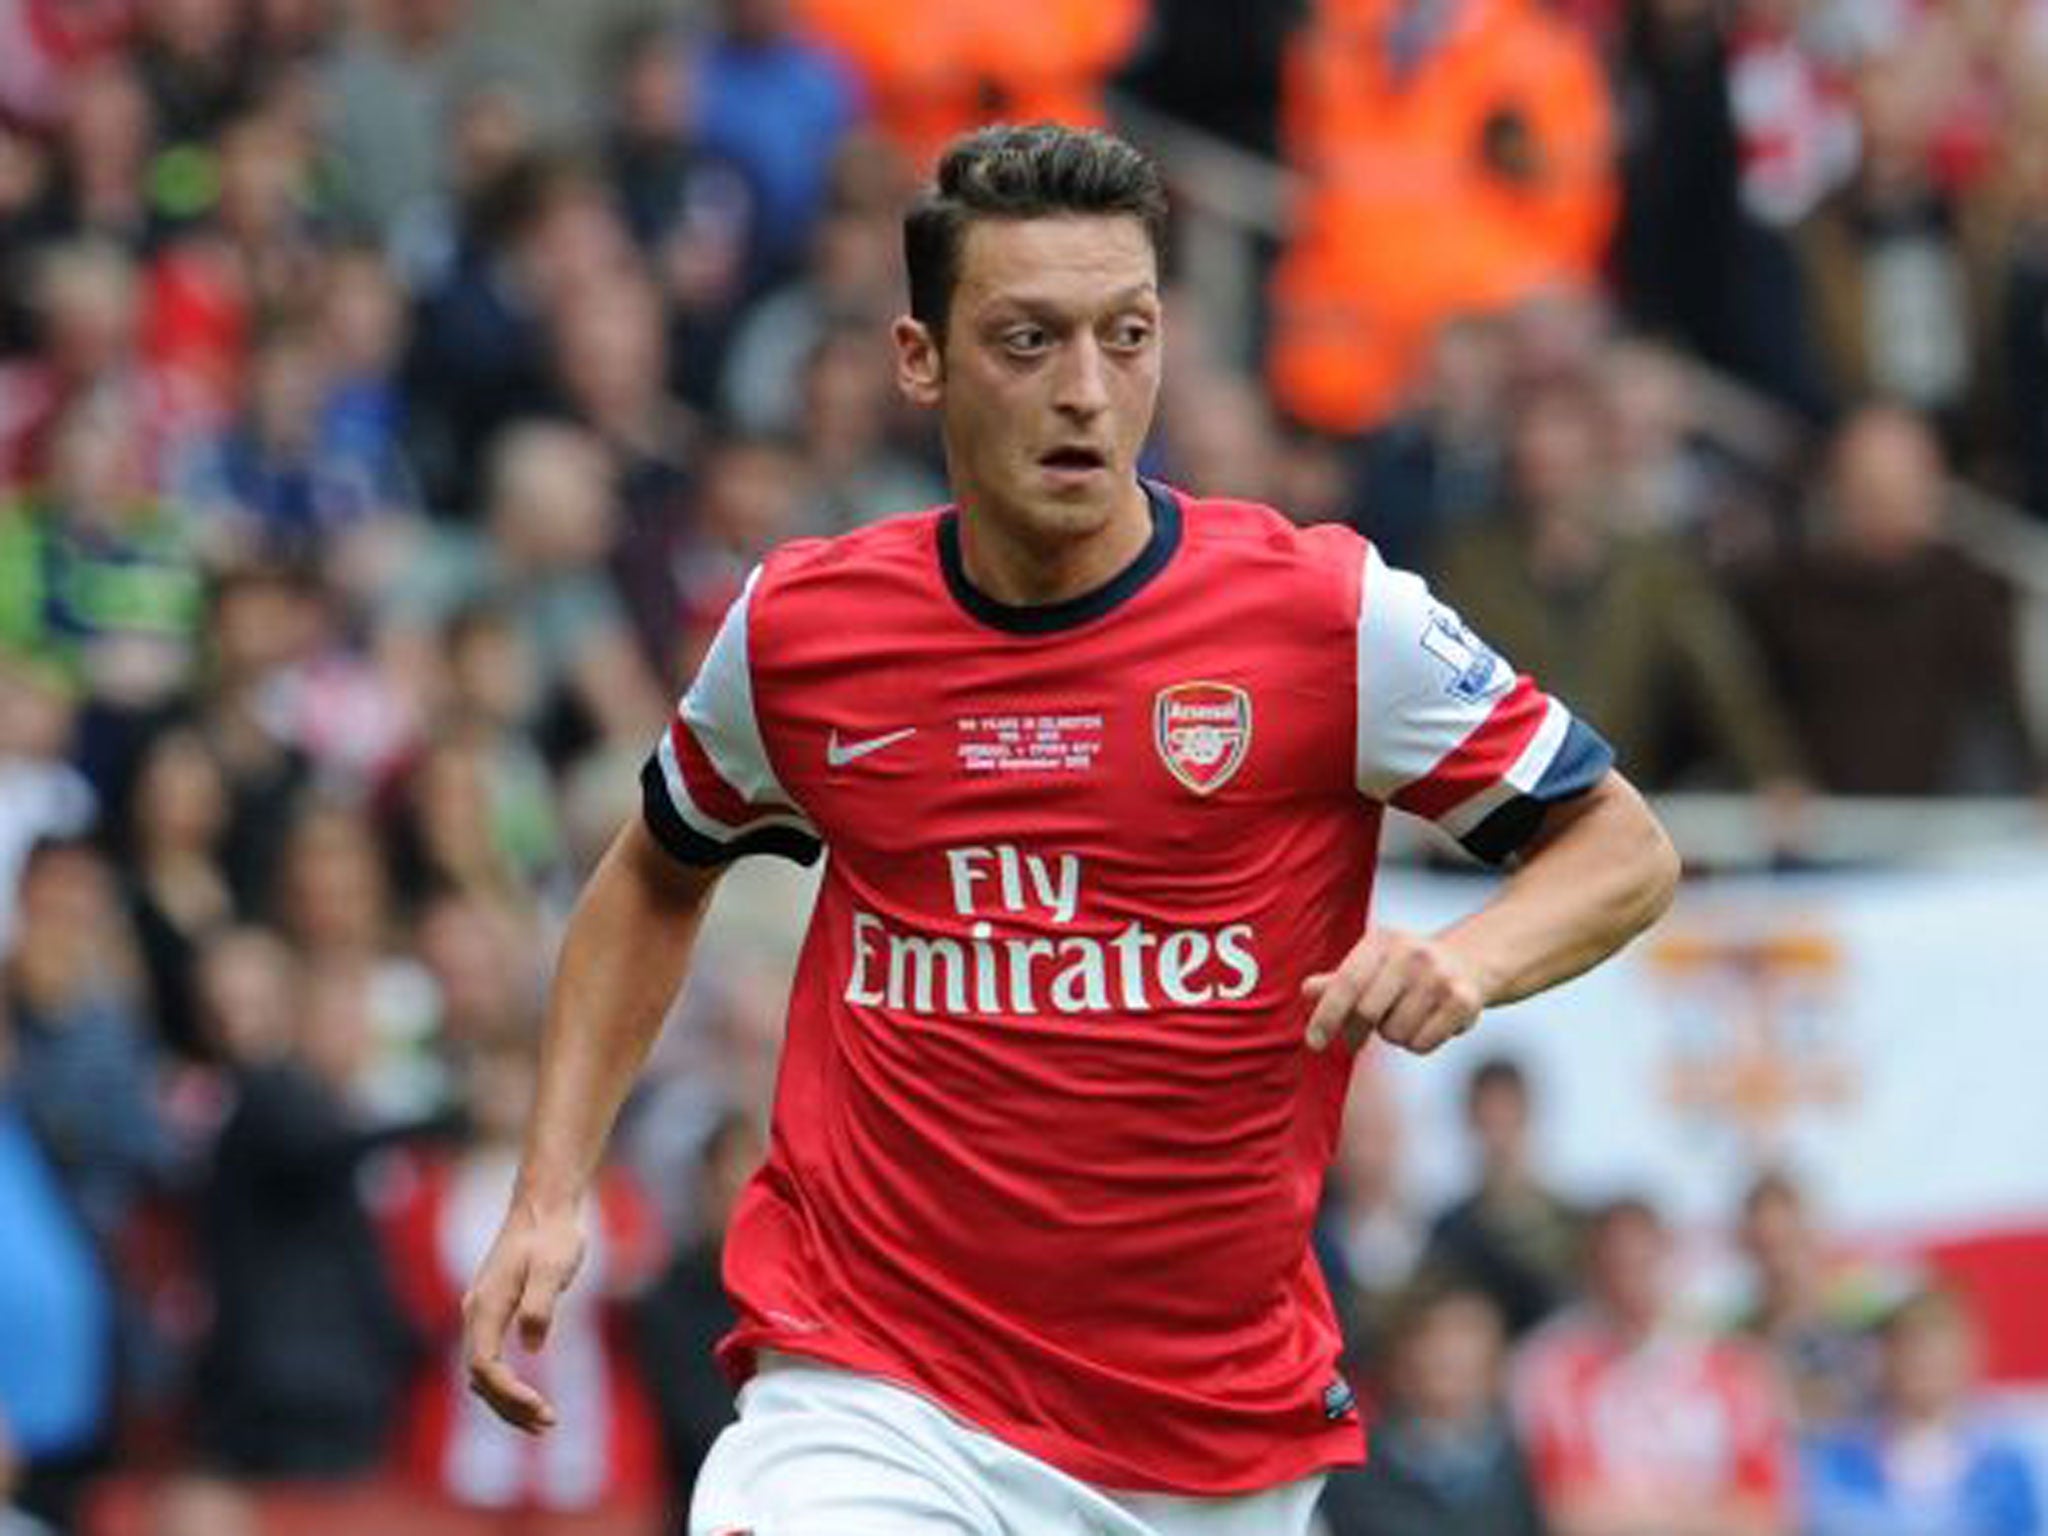 Mesut Ozil spoke highly of Arsenal youngsters Serge Gnabry and Thomas Eisfeld